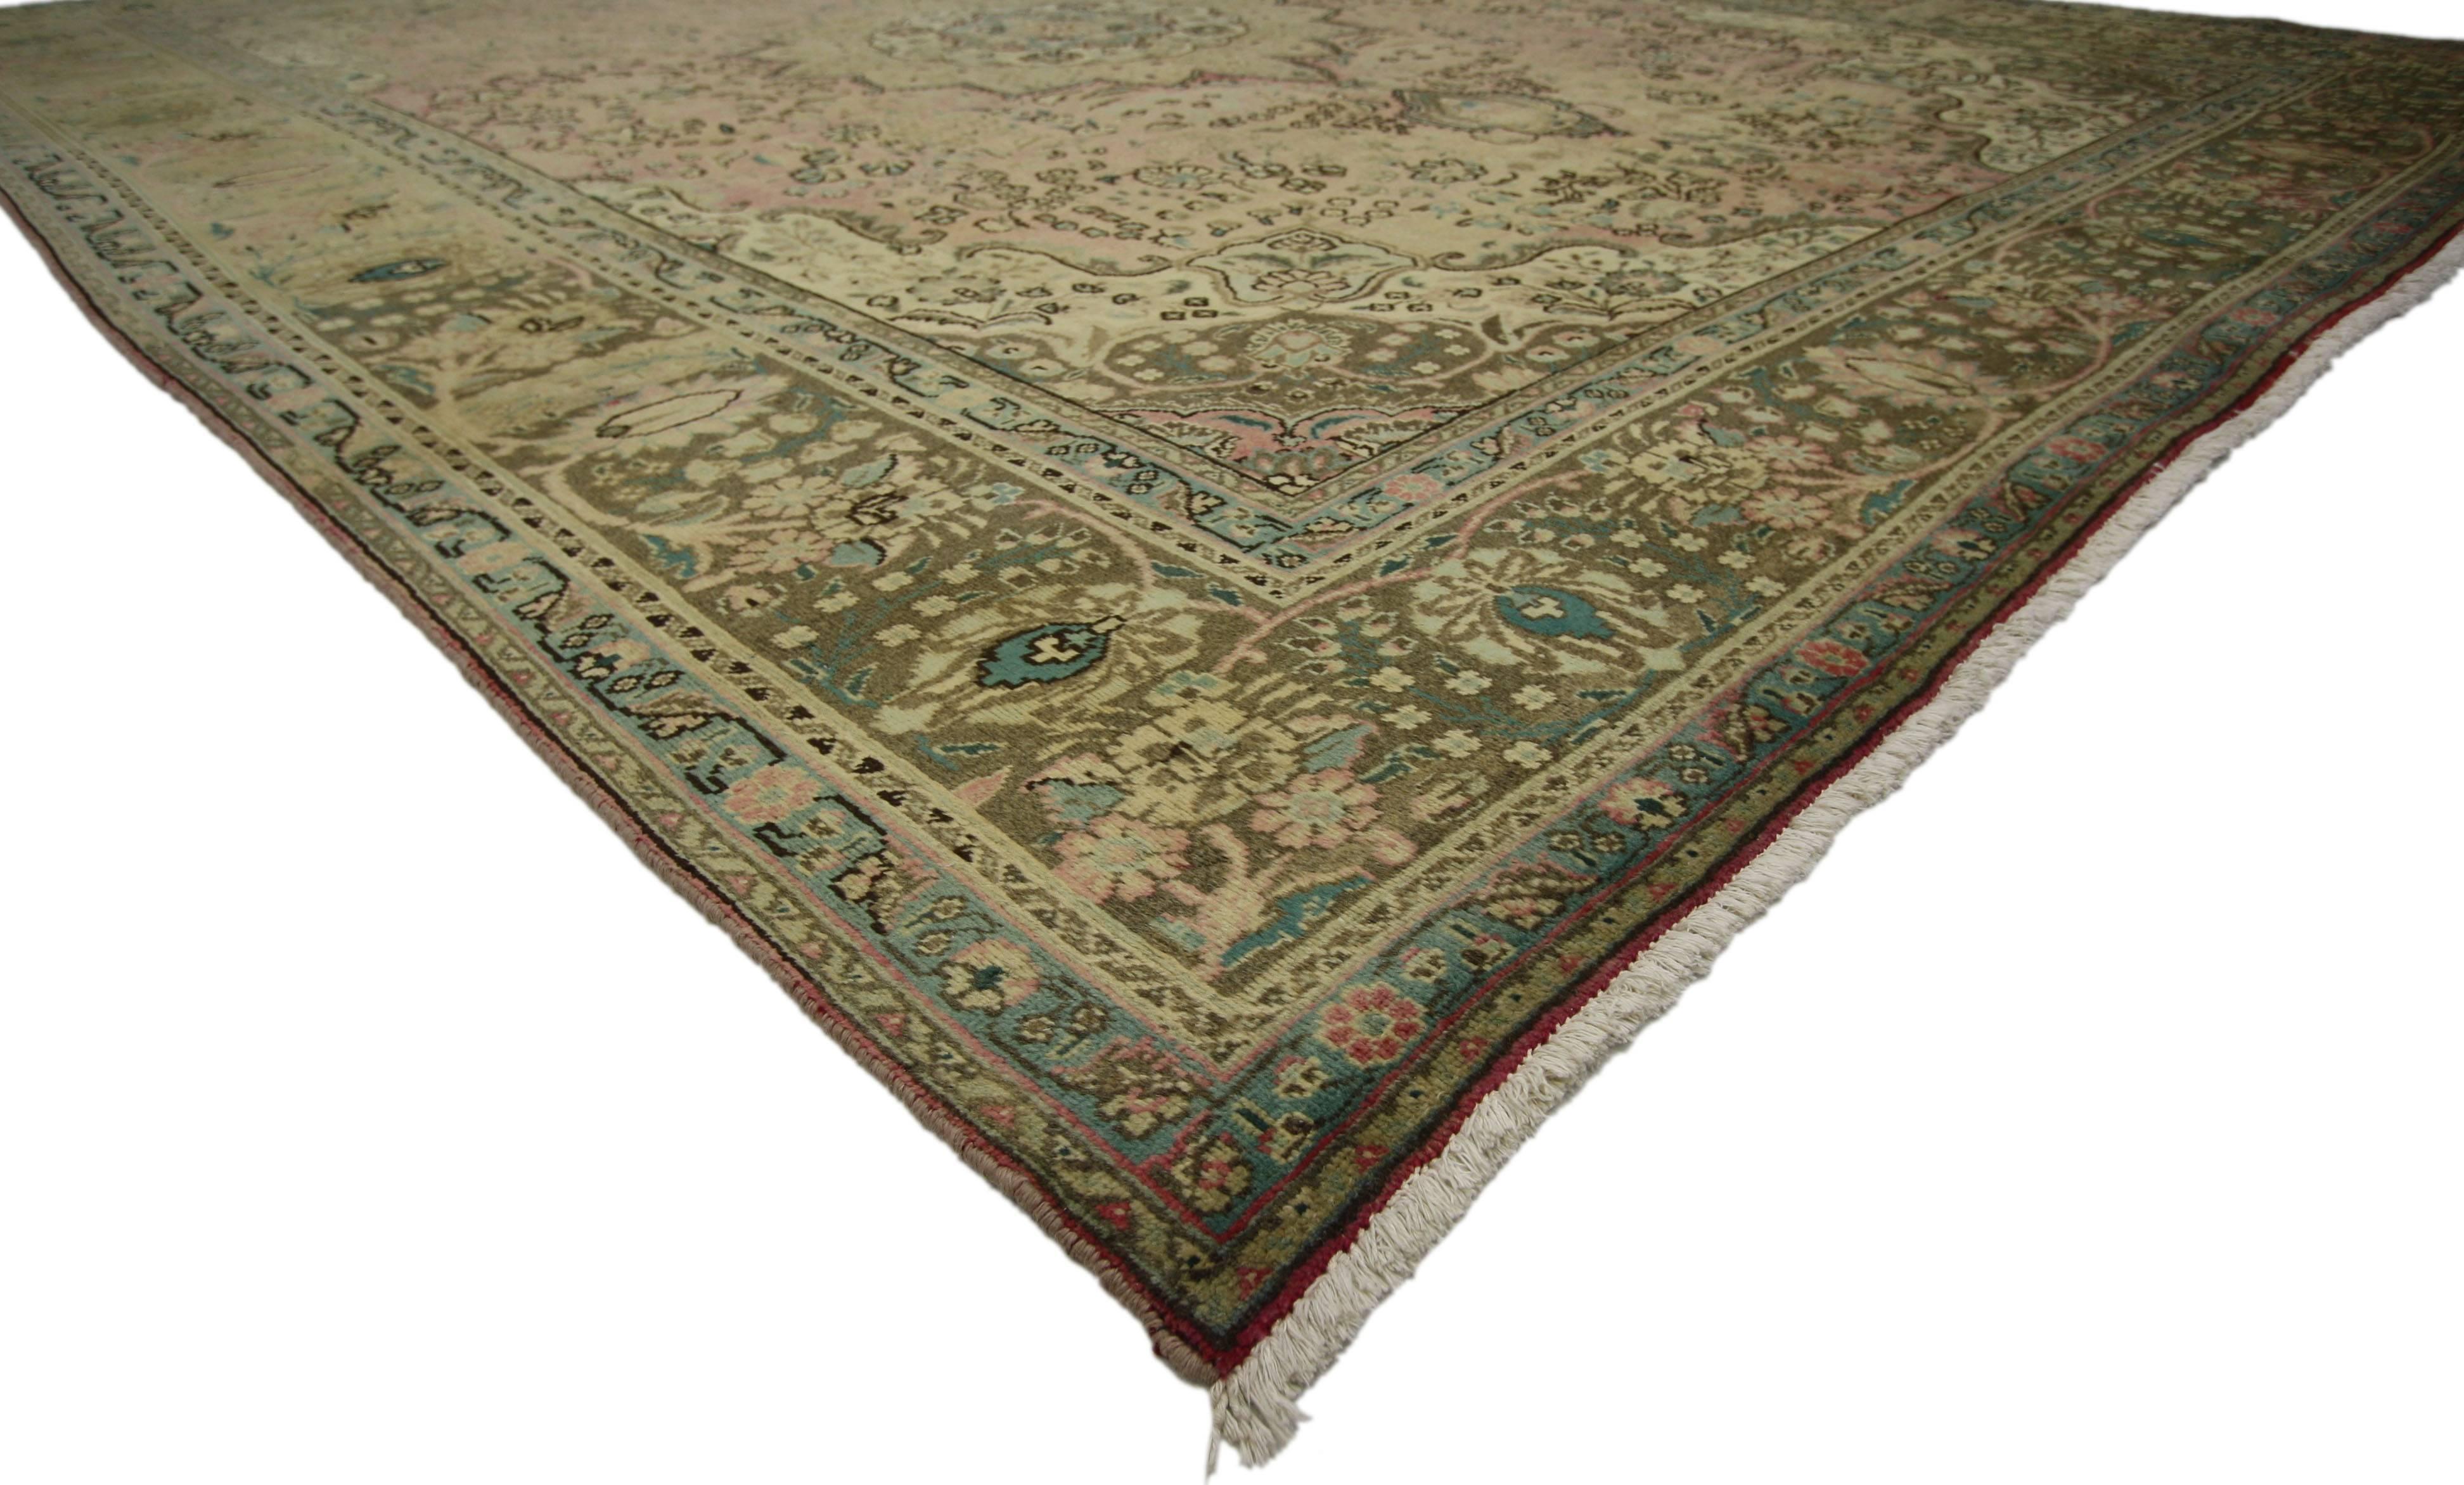 76446, vintage Persian Tabriz rug with traditional style. This hand-knotted wool vintage Persian Tabriz rug features a centre medallion with an all-over pattern surrounded by a Classic border creating a well-balanced and timeless design. This